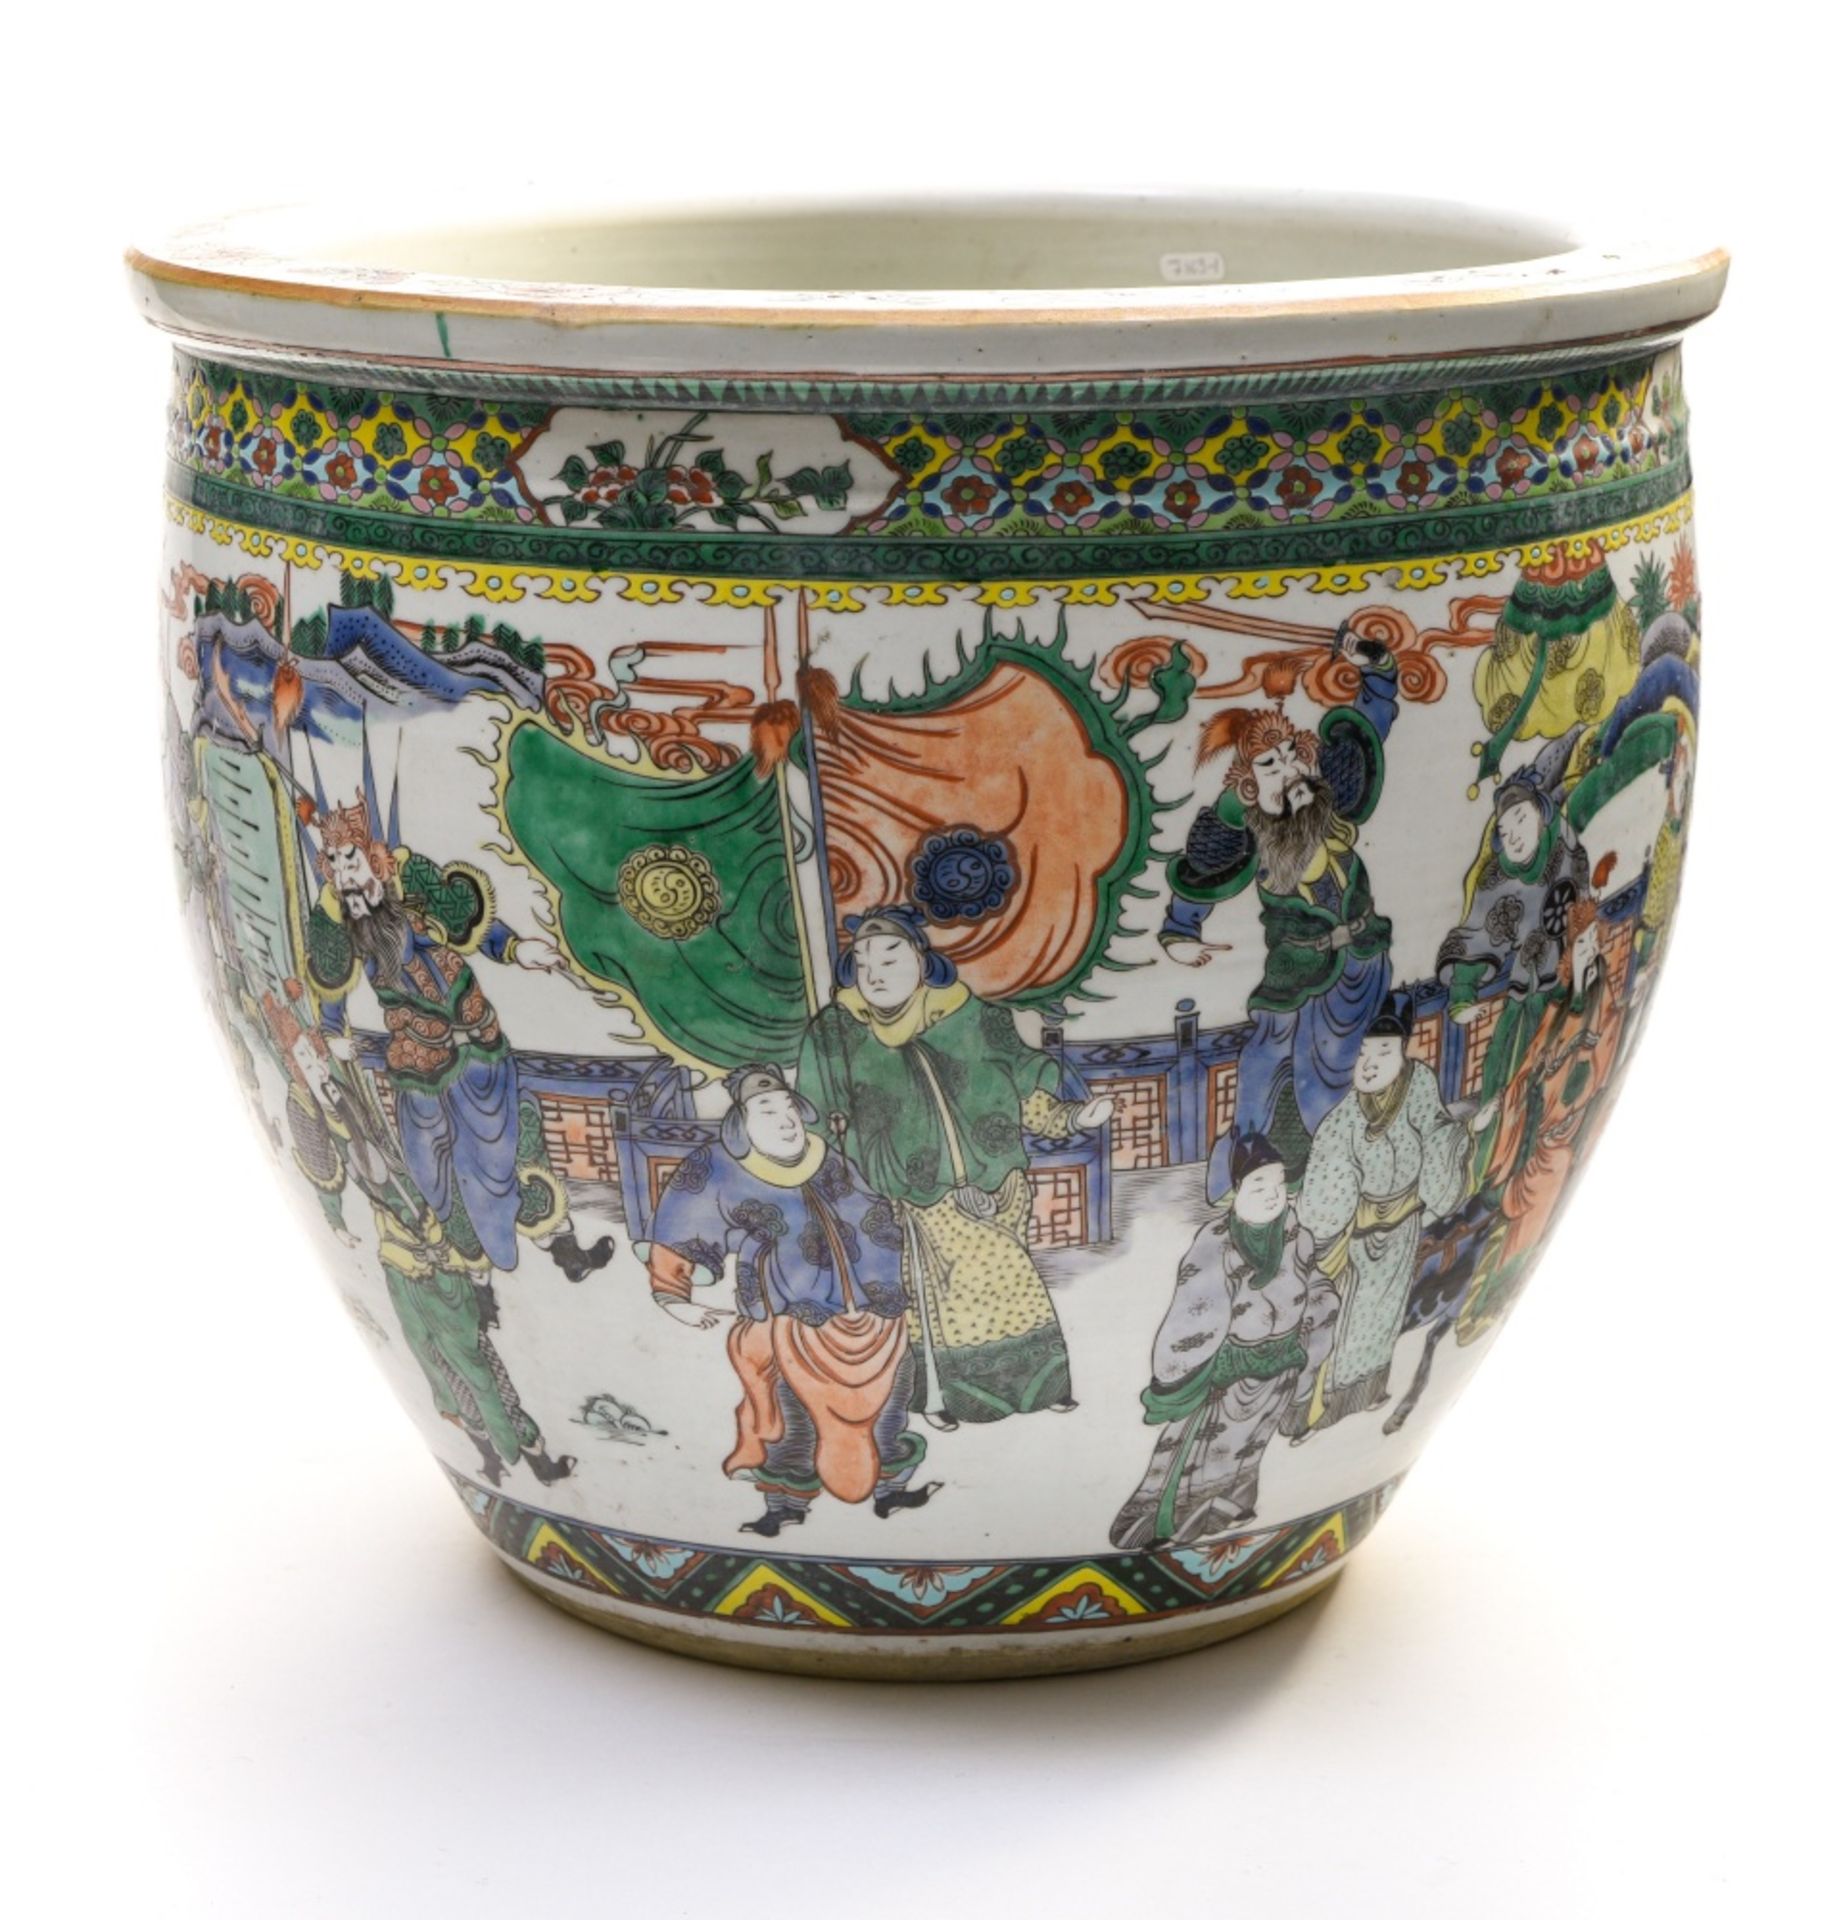 China, late 19th century, early 20th century Famille Verte planter or aquarium, Porcelain decorated - Image 3 of 7